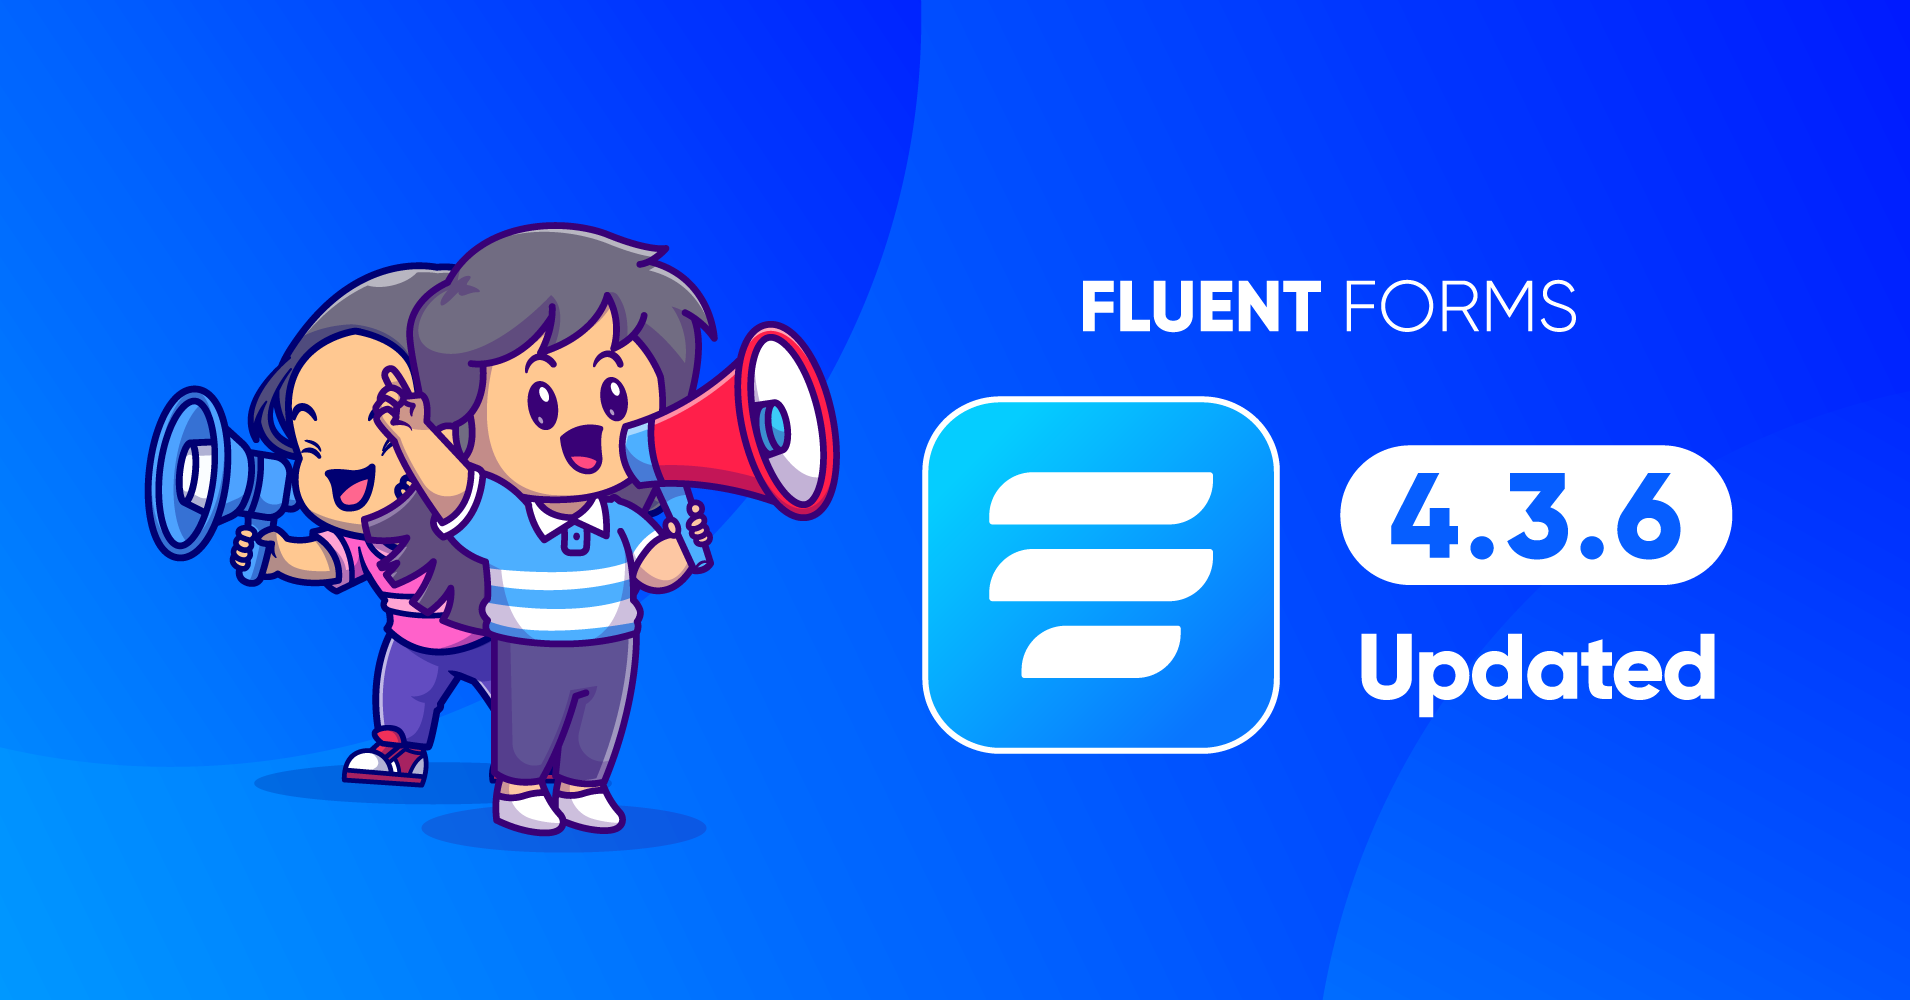 Fluent Forms 4.3.6 release note